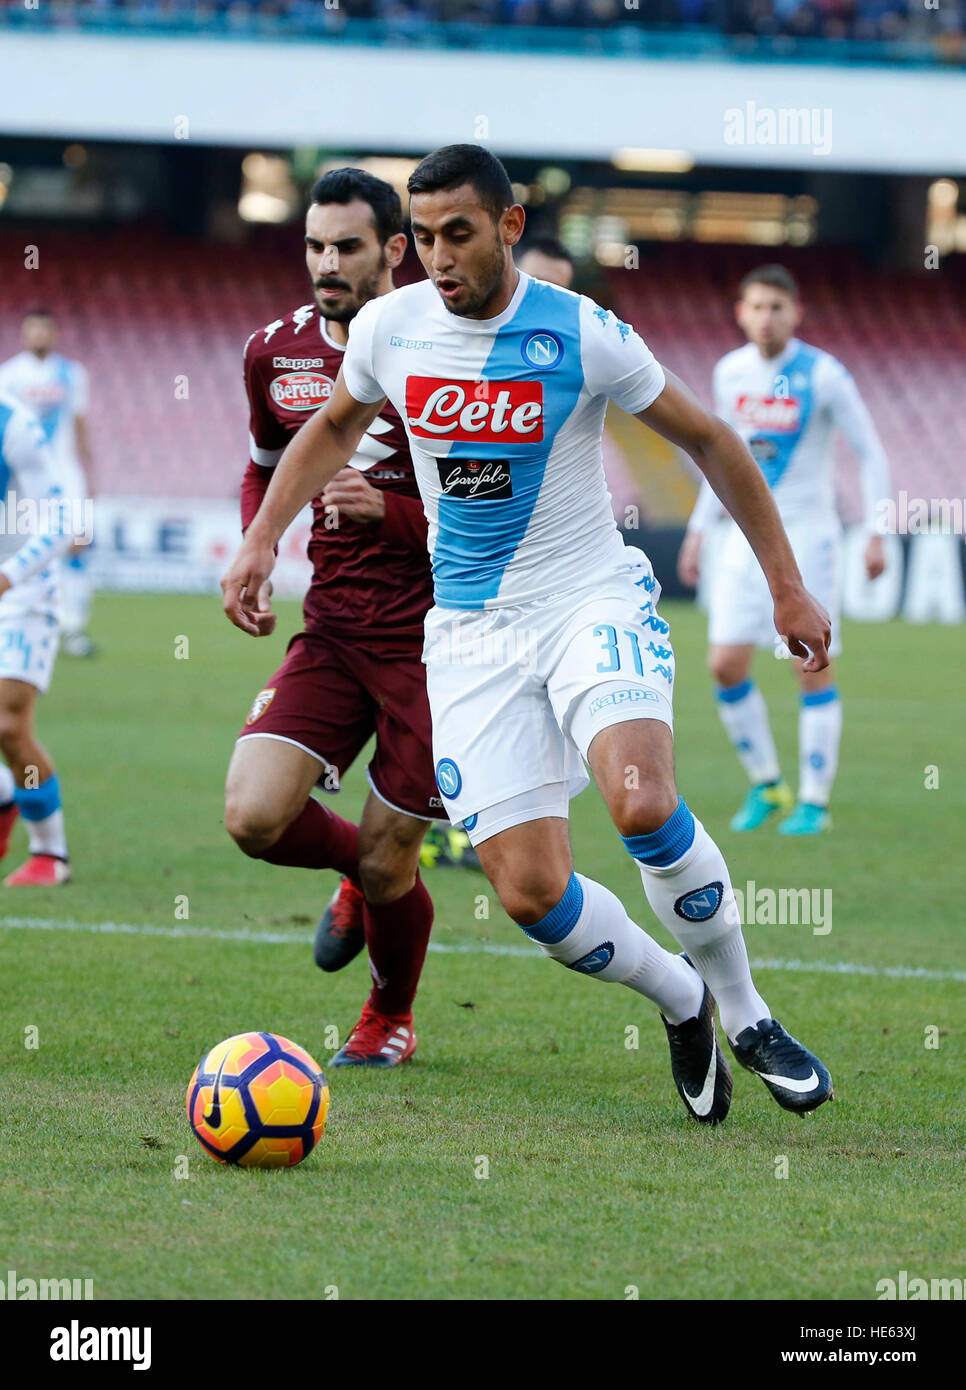 Naples, Italy. 18th Dec, 2016. Faouzi Ghoulam during the italian serie a soccer match, between SSC Napoli and Torino at the San Paolo stadium in Naples Italy, December 18, 2016 © agnfoto/Alamy Live News Stock Photo